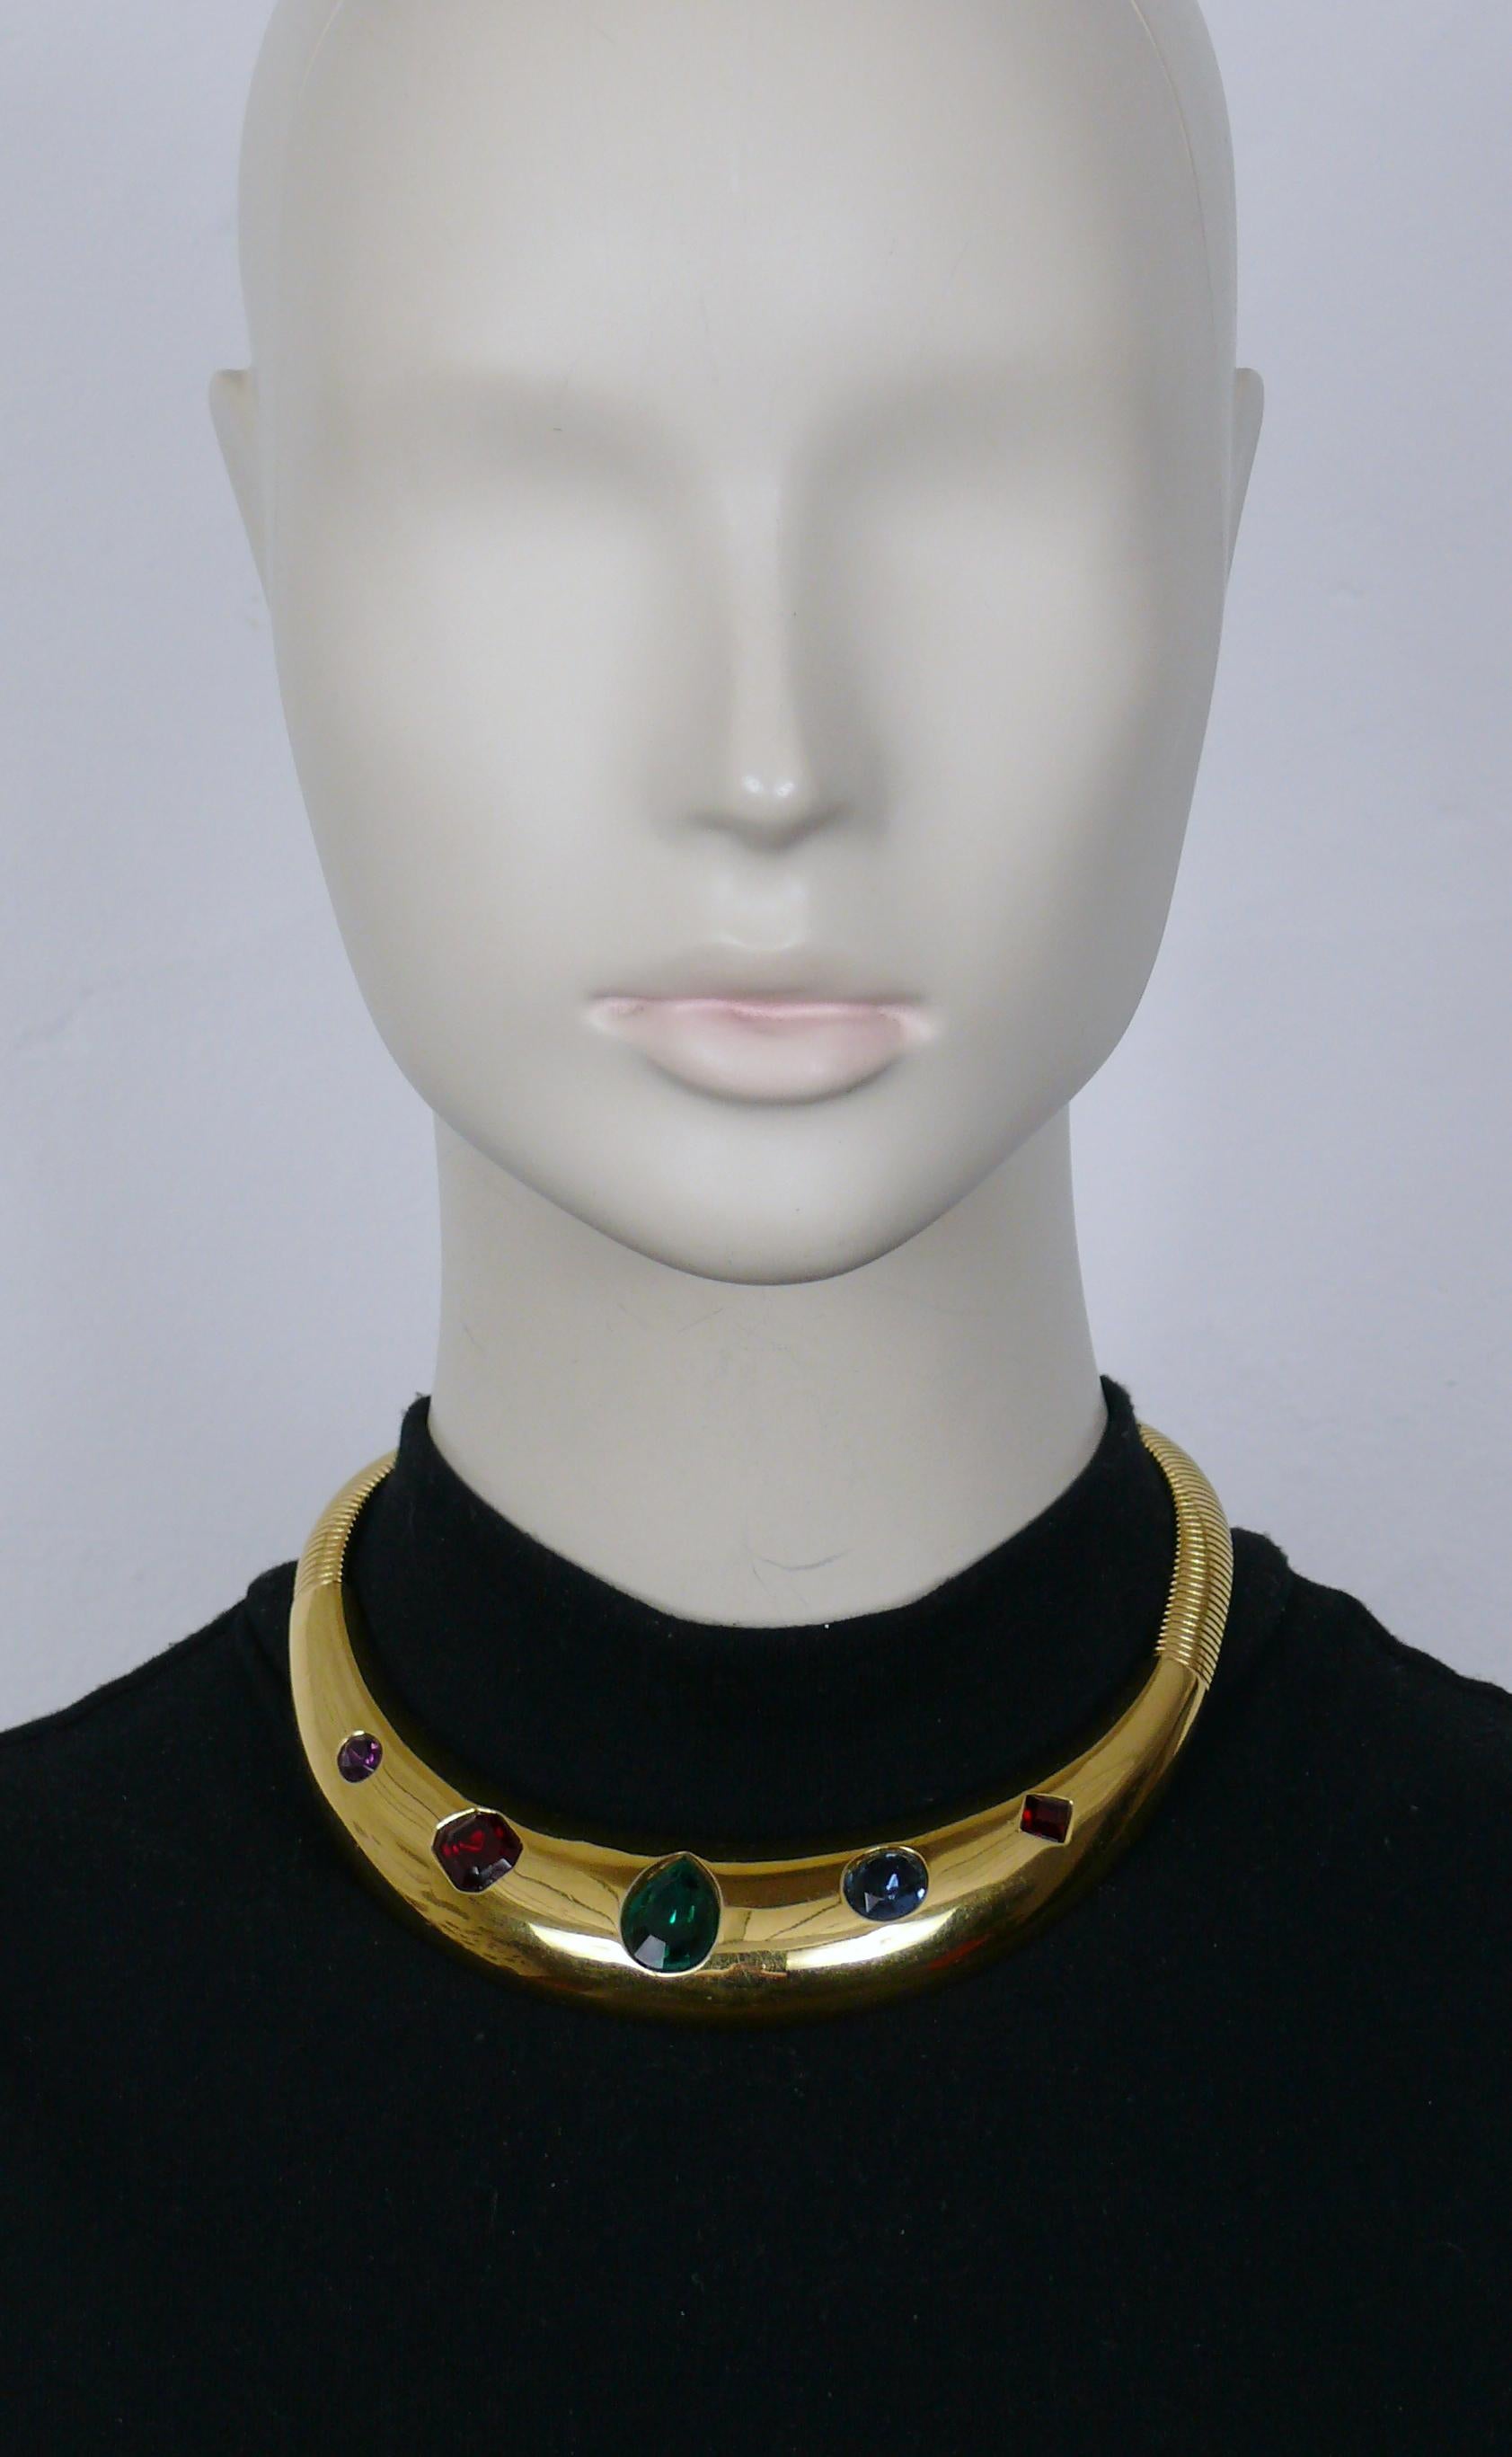 GIVENCHY gold tone collar necklace embellished with multicolor crystals.

Fold over clasp closure.

Embossed GIVENCHY Paris New-York on the clasp.

Indicative measurements : inner circumference approx. 37.70 cm (14.84 inches) / max. width approx.